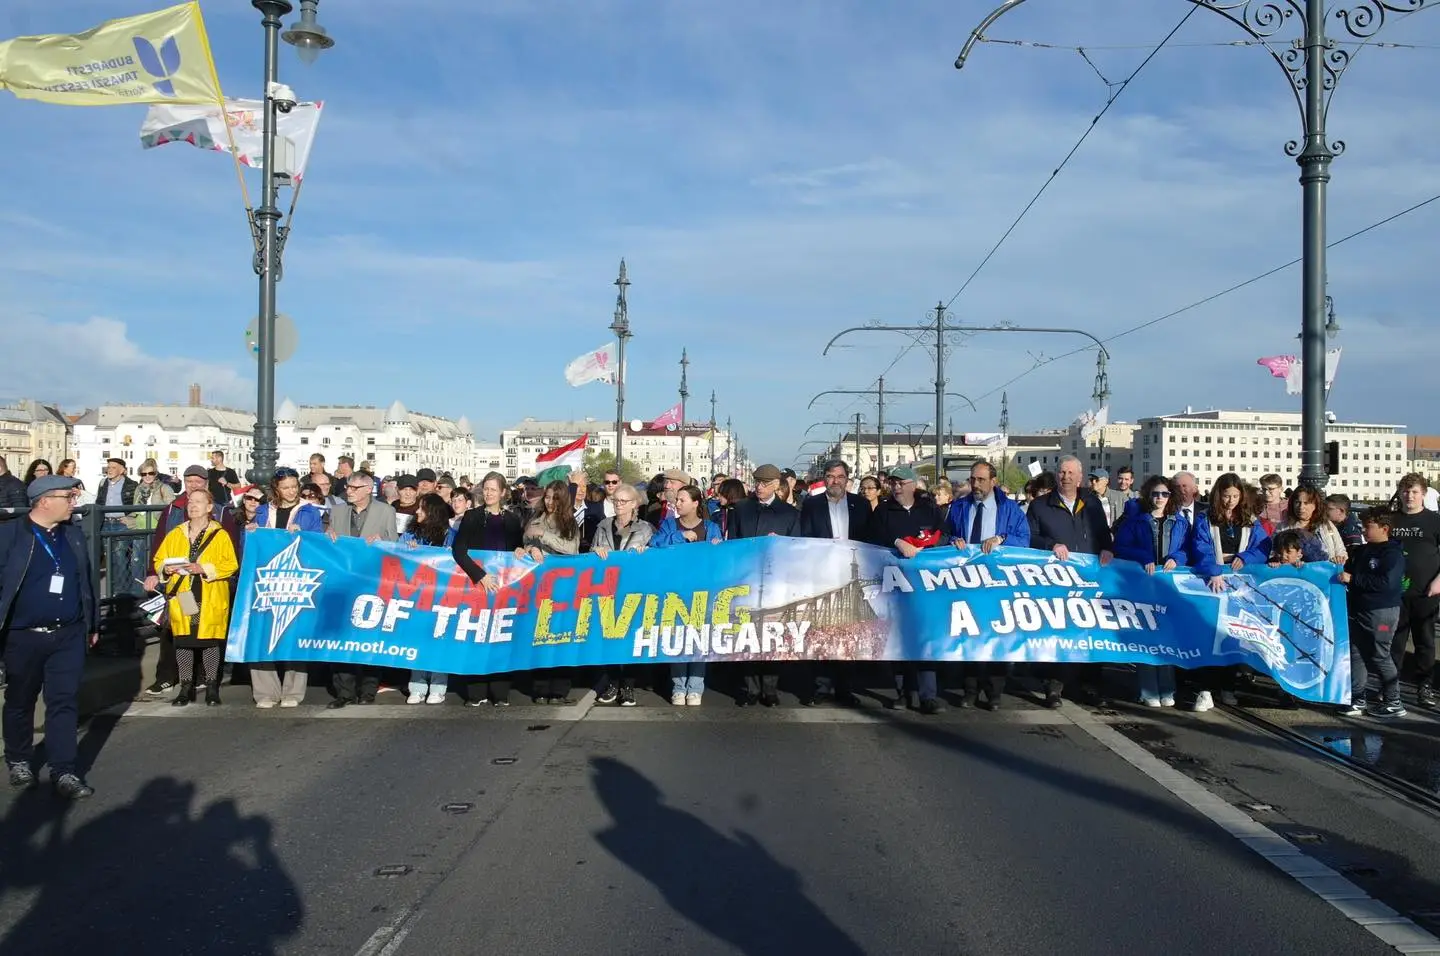 March of the Living to be held in Budapest this Sunday